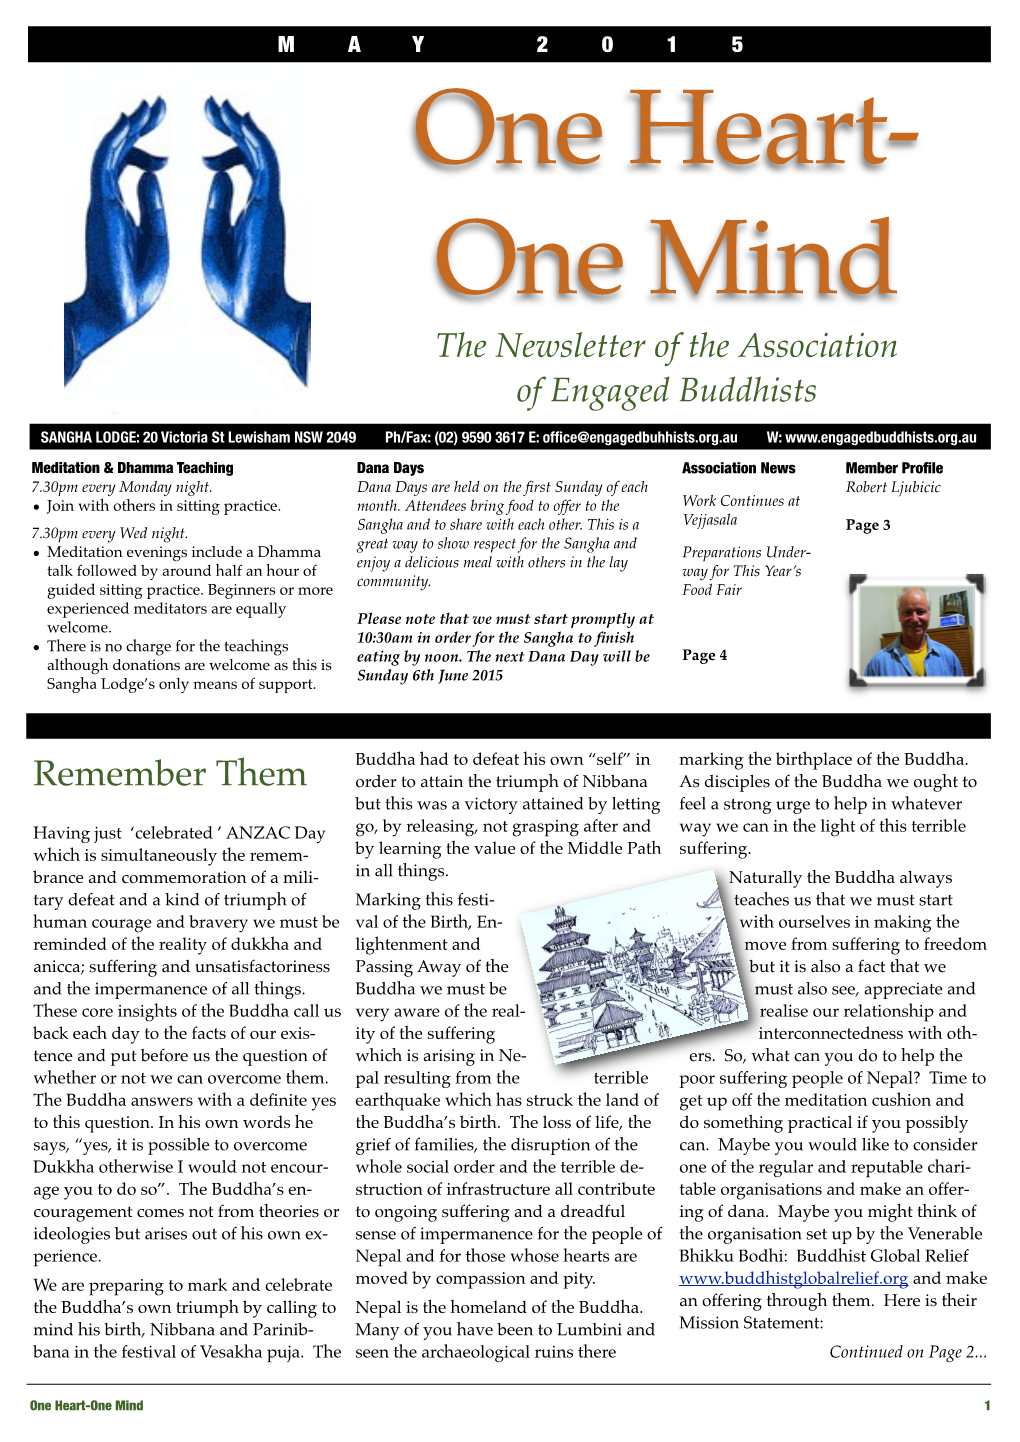 One Heart- One Mind the Newsletter of the Association of Engaged Buddhists